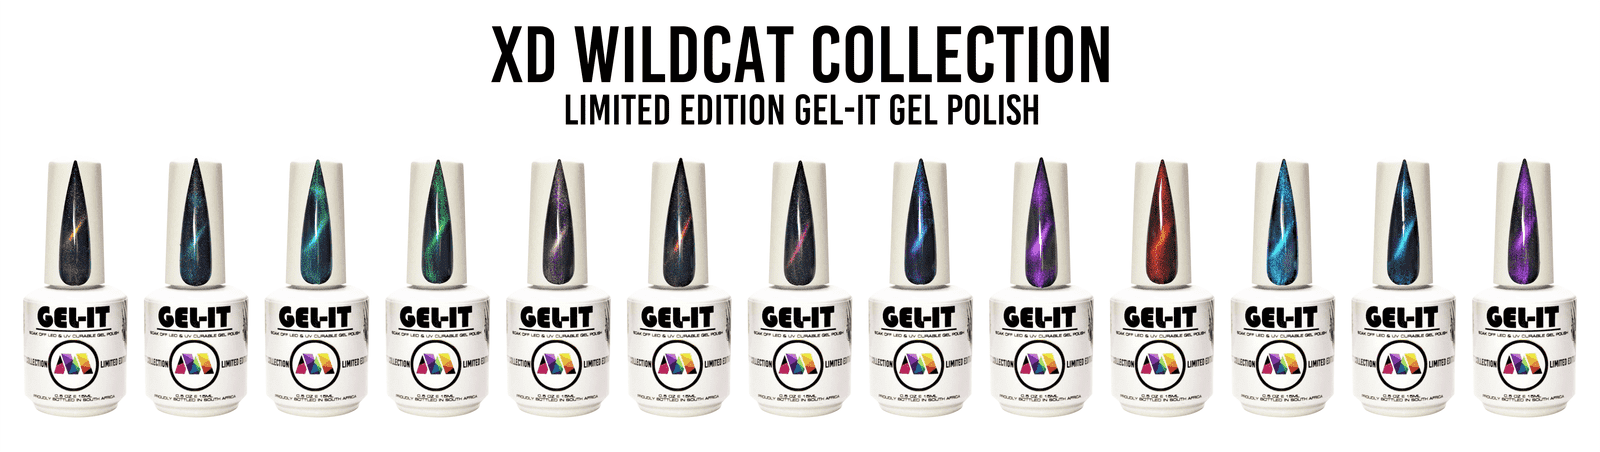 GPWC08 - Sand Cat (XD Wildcat Collection - Limited Edition) - Maskscara